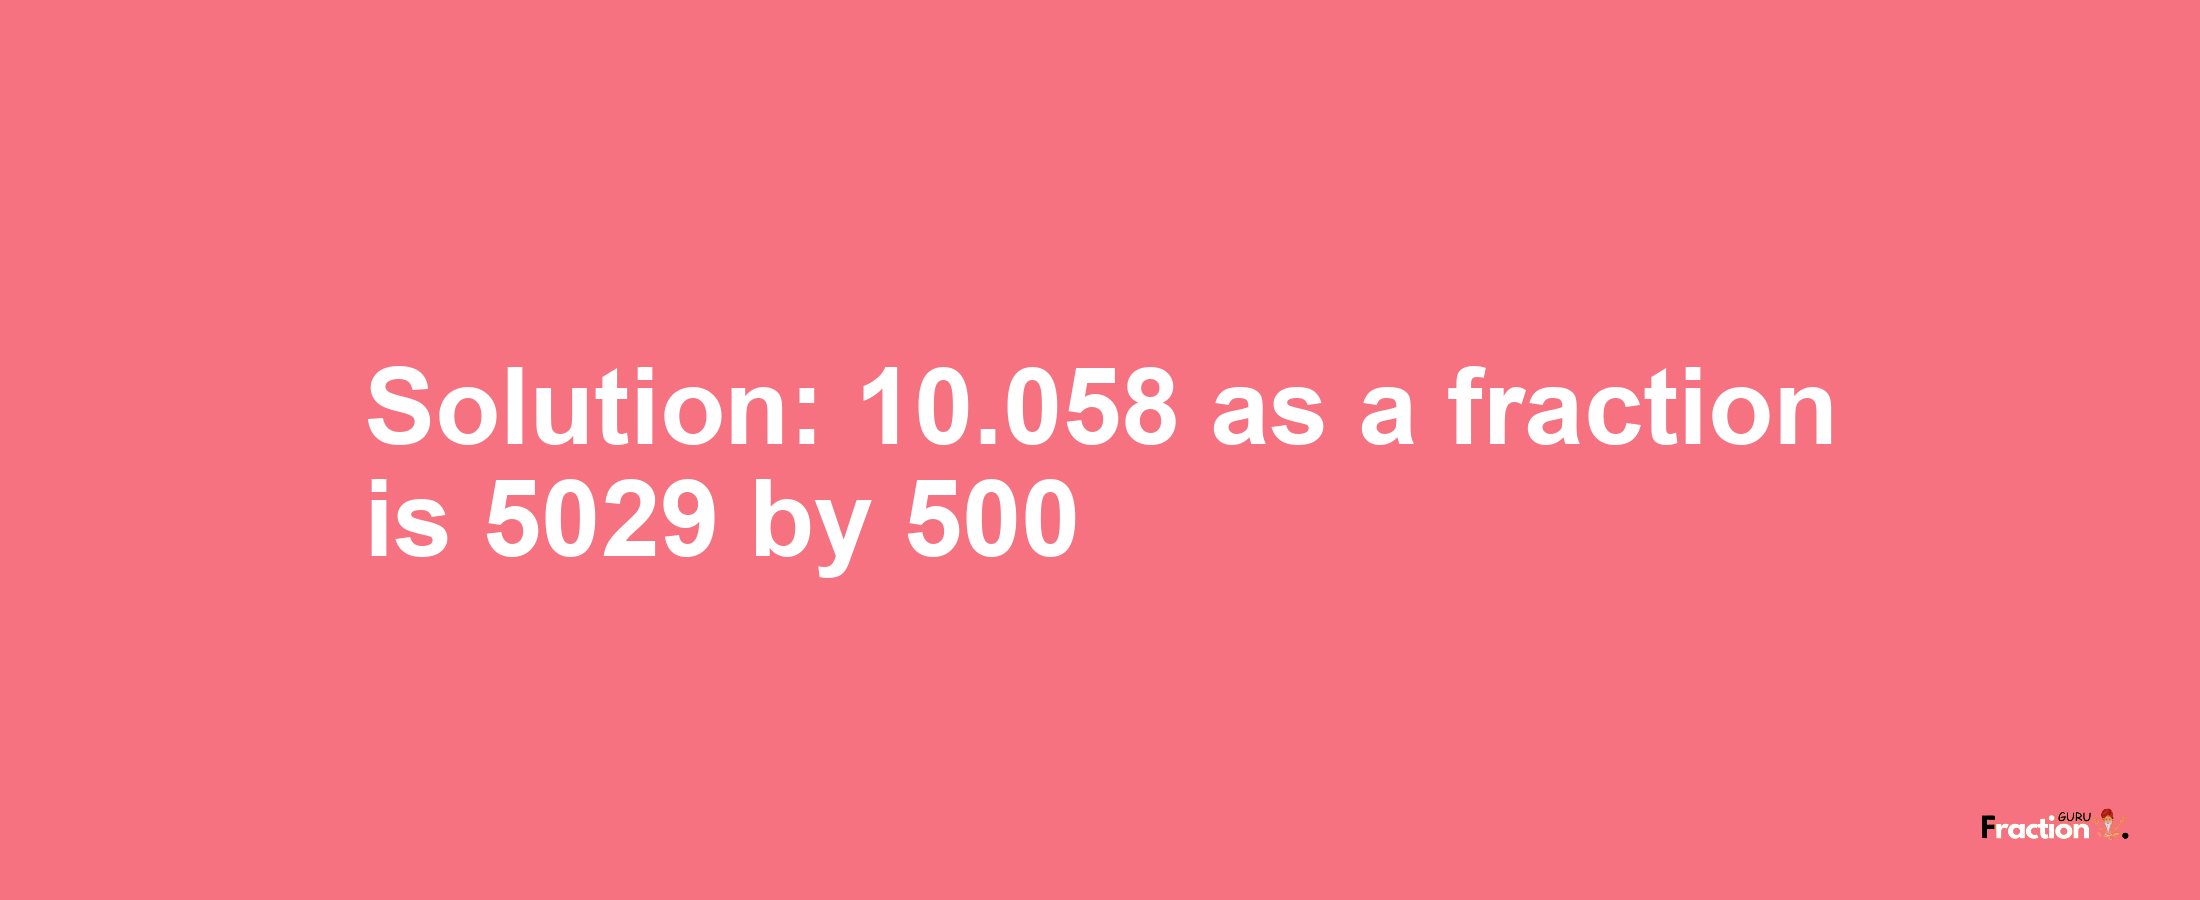 Solution:10.058 as a fraction is 5029/500